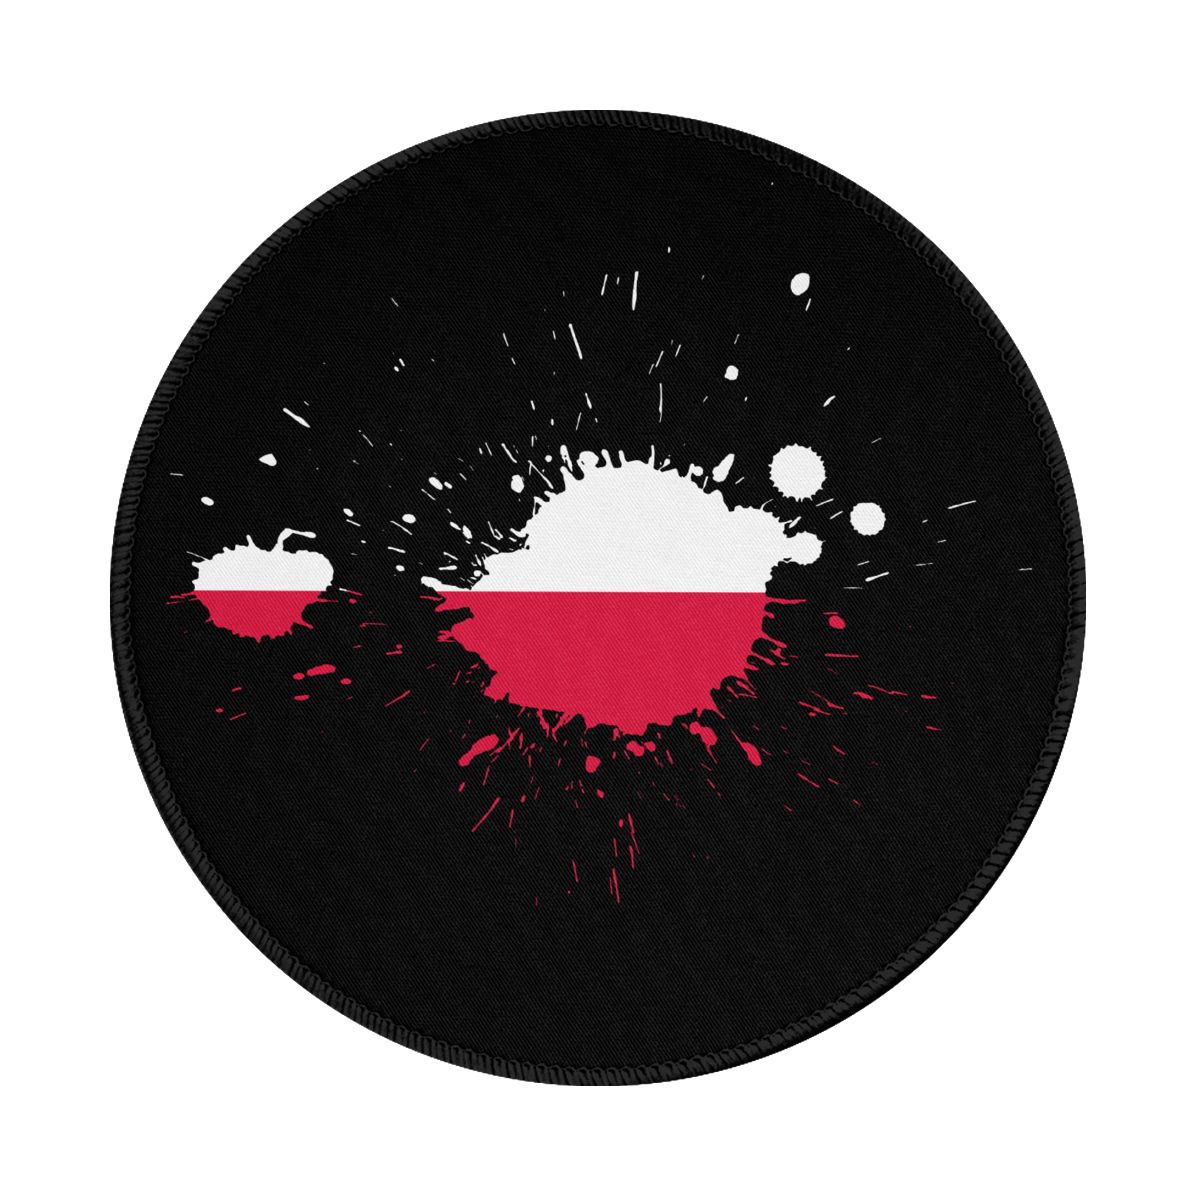 Poland Ink Spatter Waterproof Round Mouse Pad for Wireless Mouse